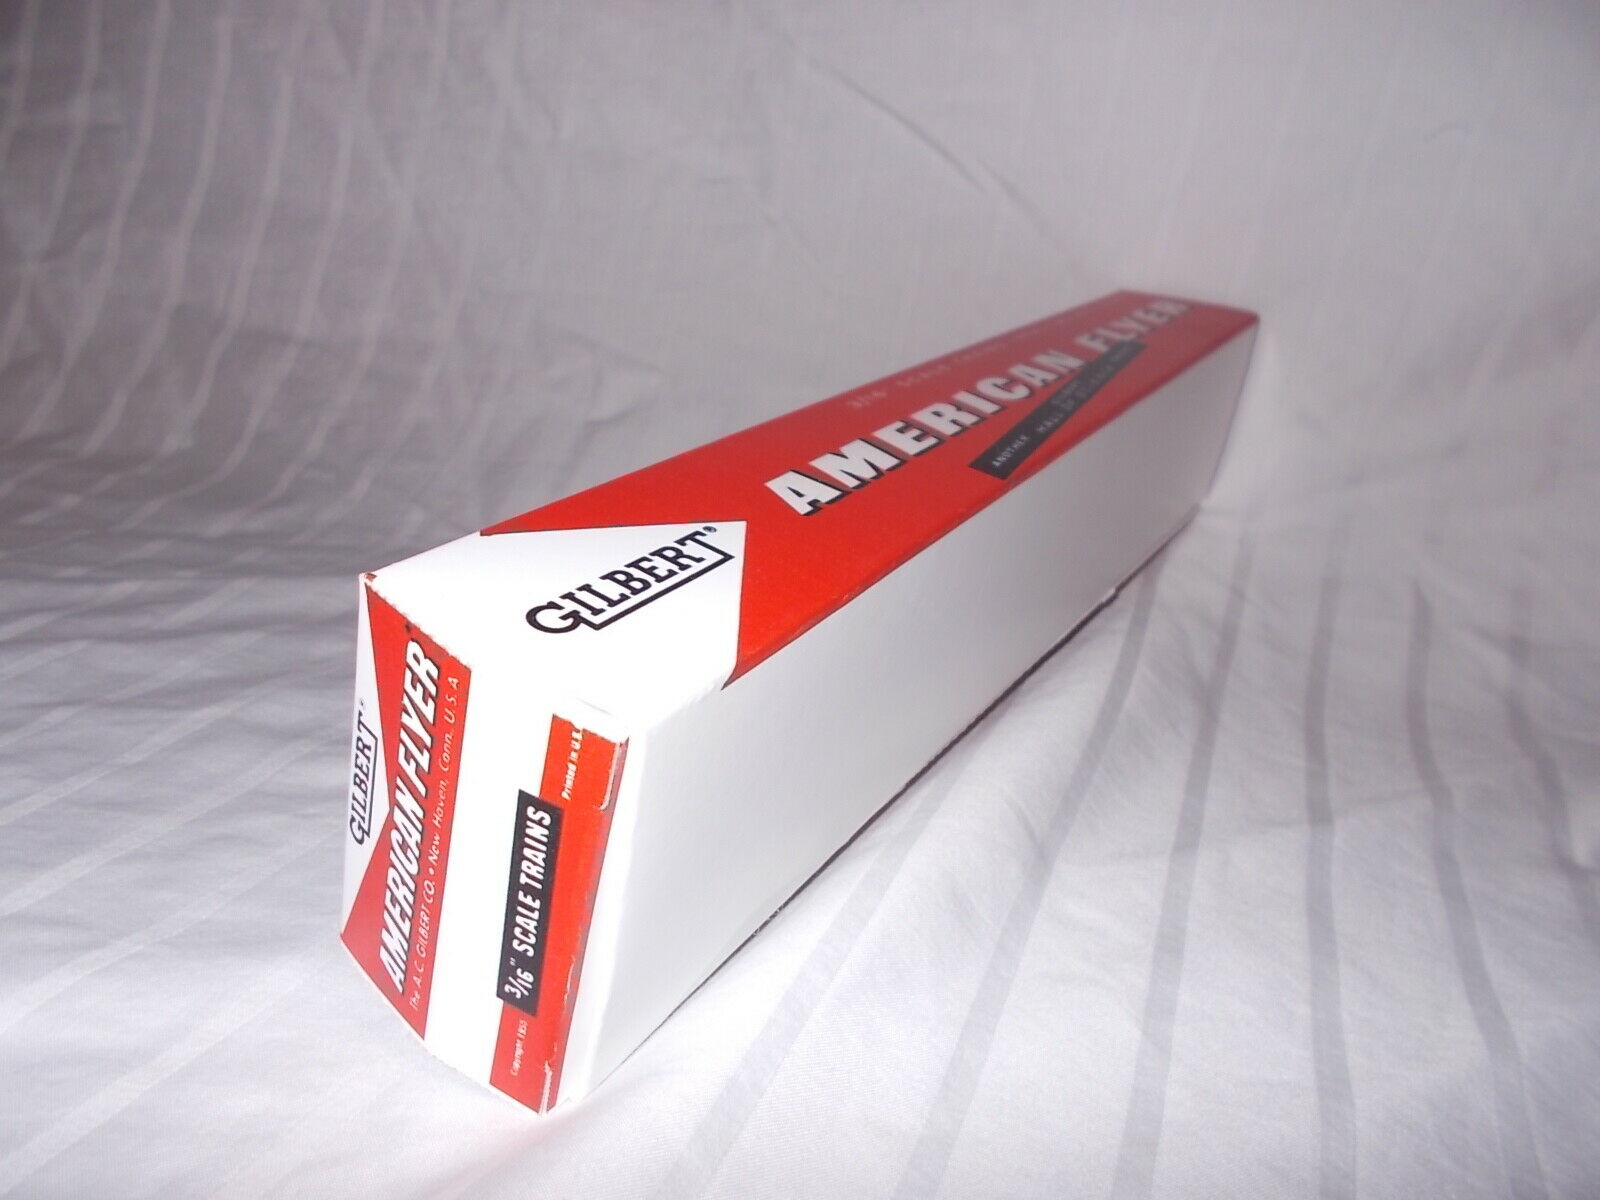 American Flyer Repro Passenger Car Box Only  Un Assembled,no Car Included